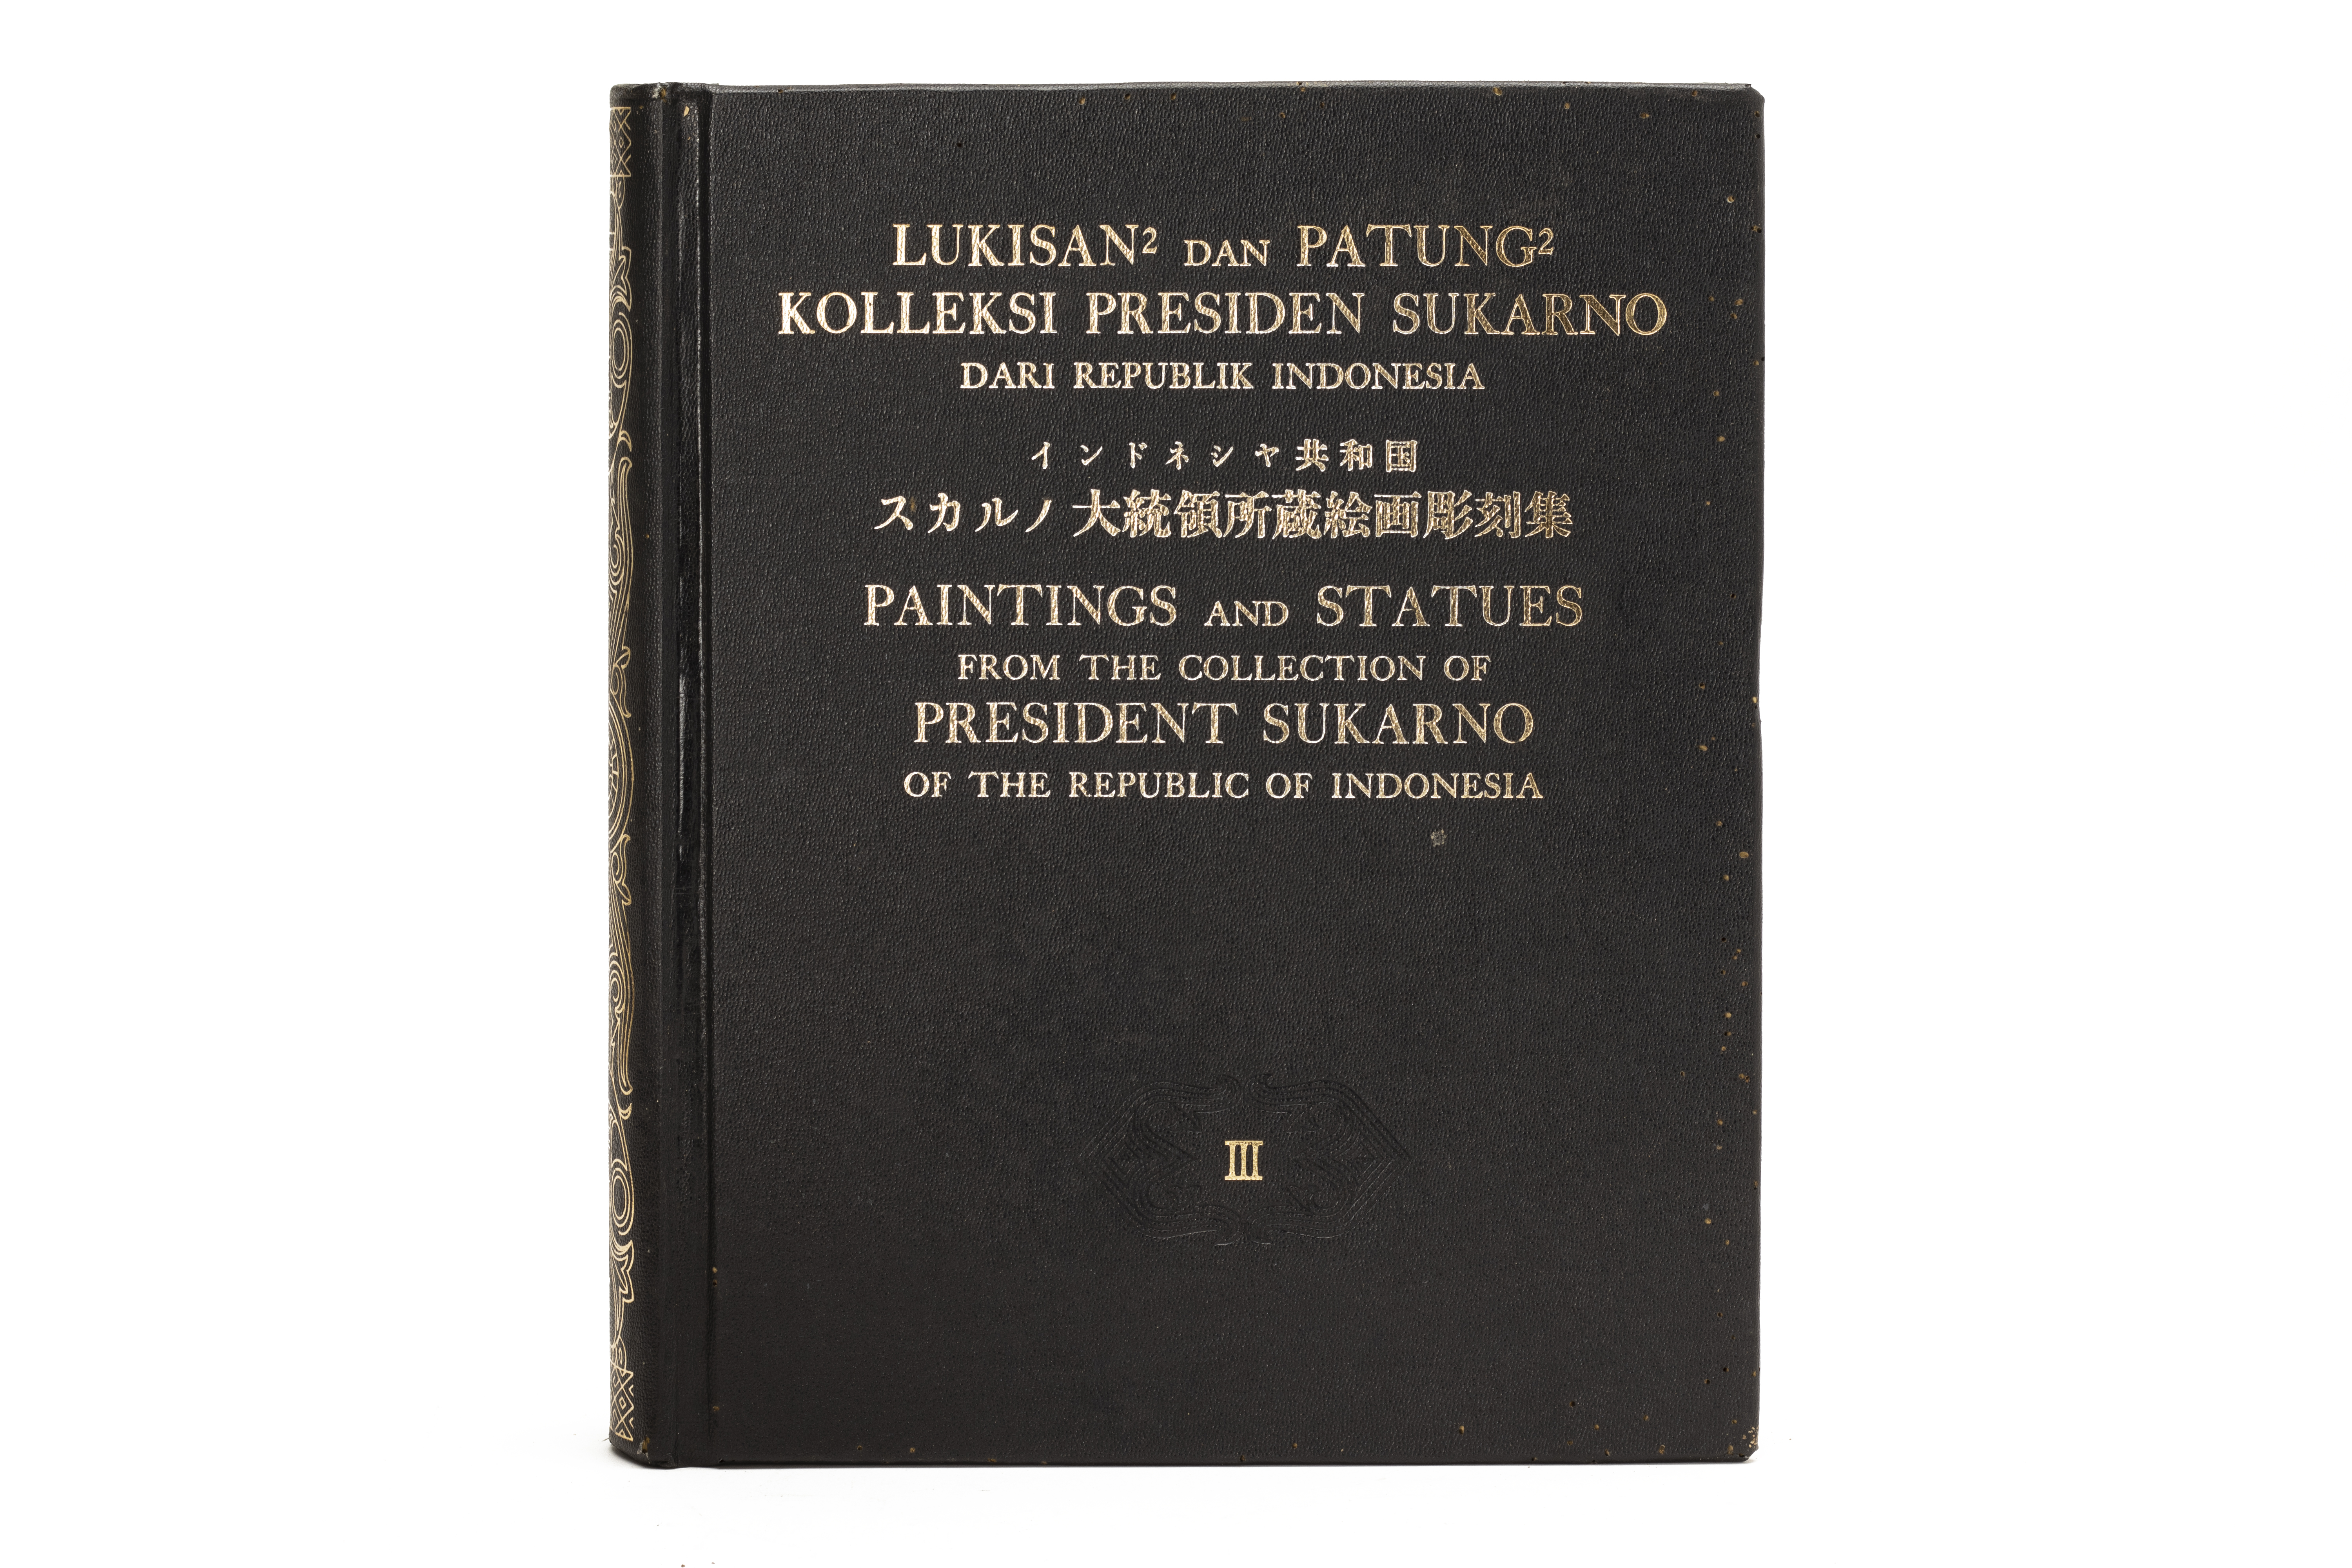 LEE MAN FONG - THE COLLECTION OF PRESIDENT SUKARNO - Image 4 of 15